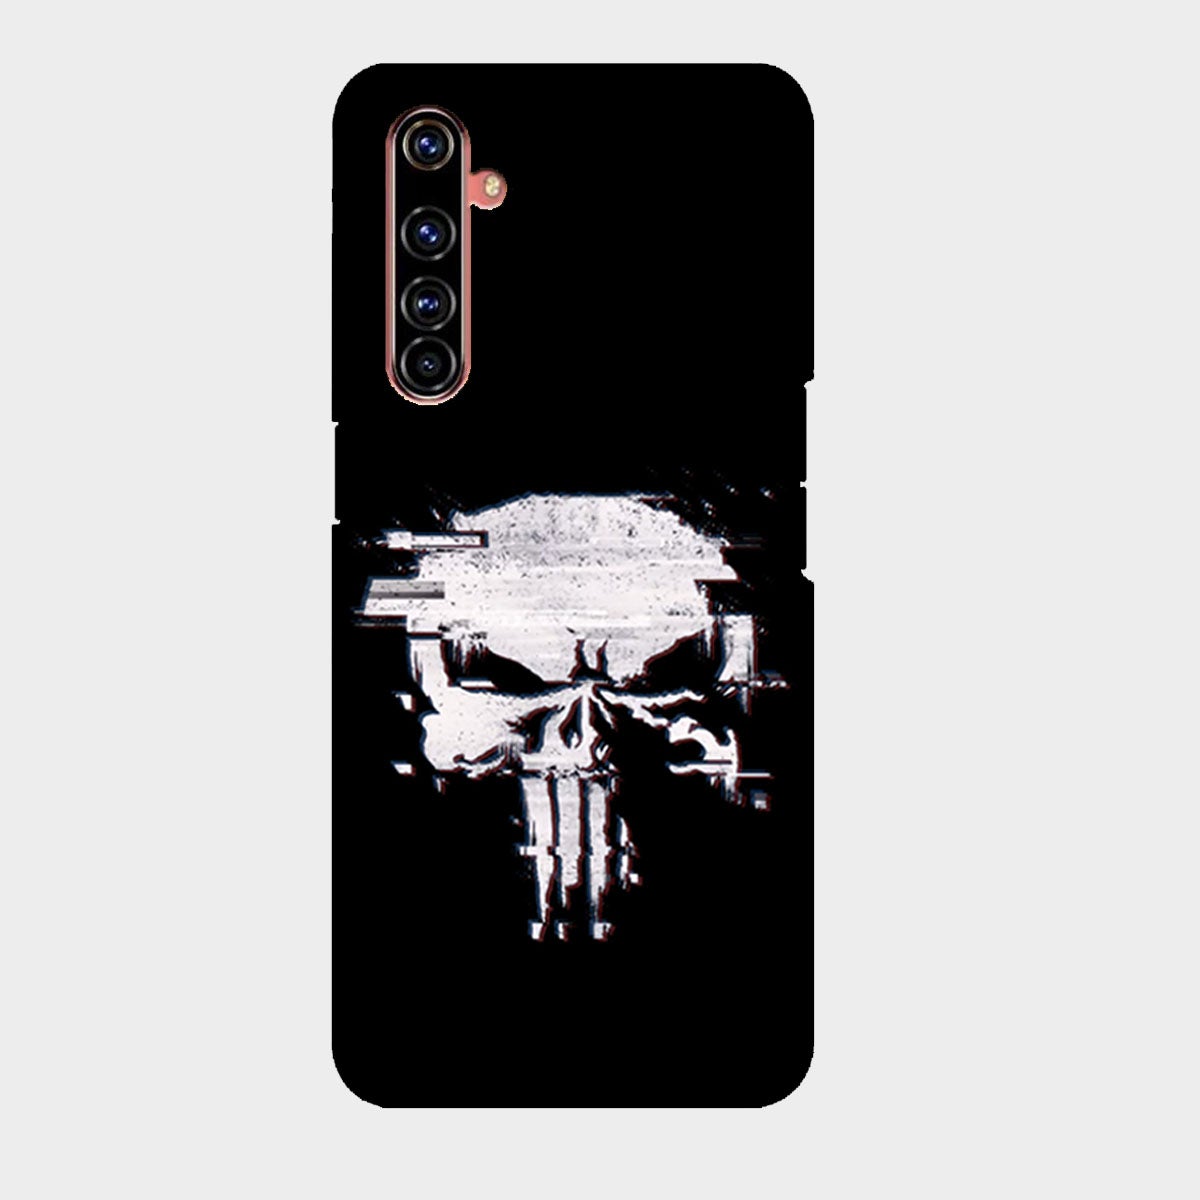 The Punisher - Mobile Phone Cover - Hard Case